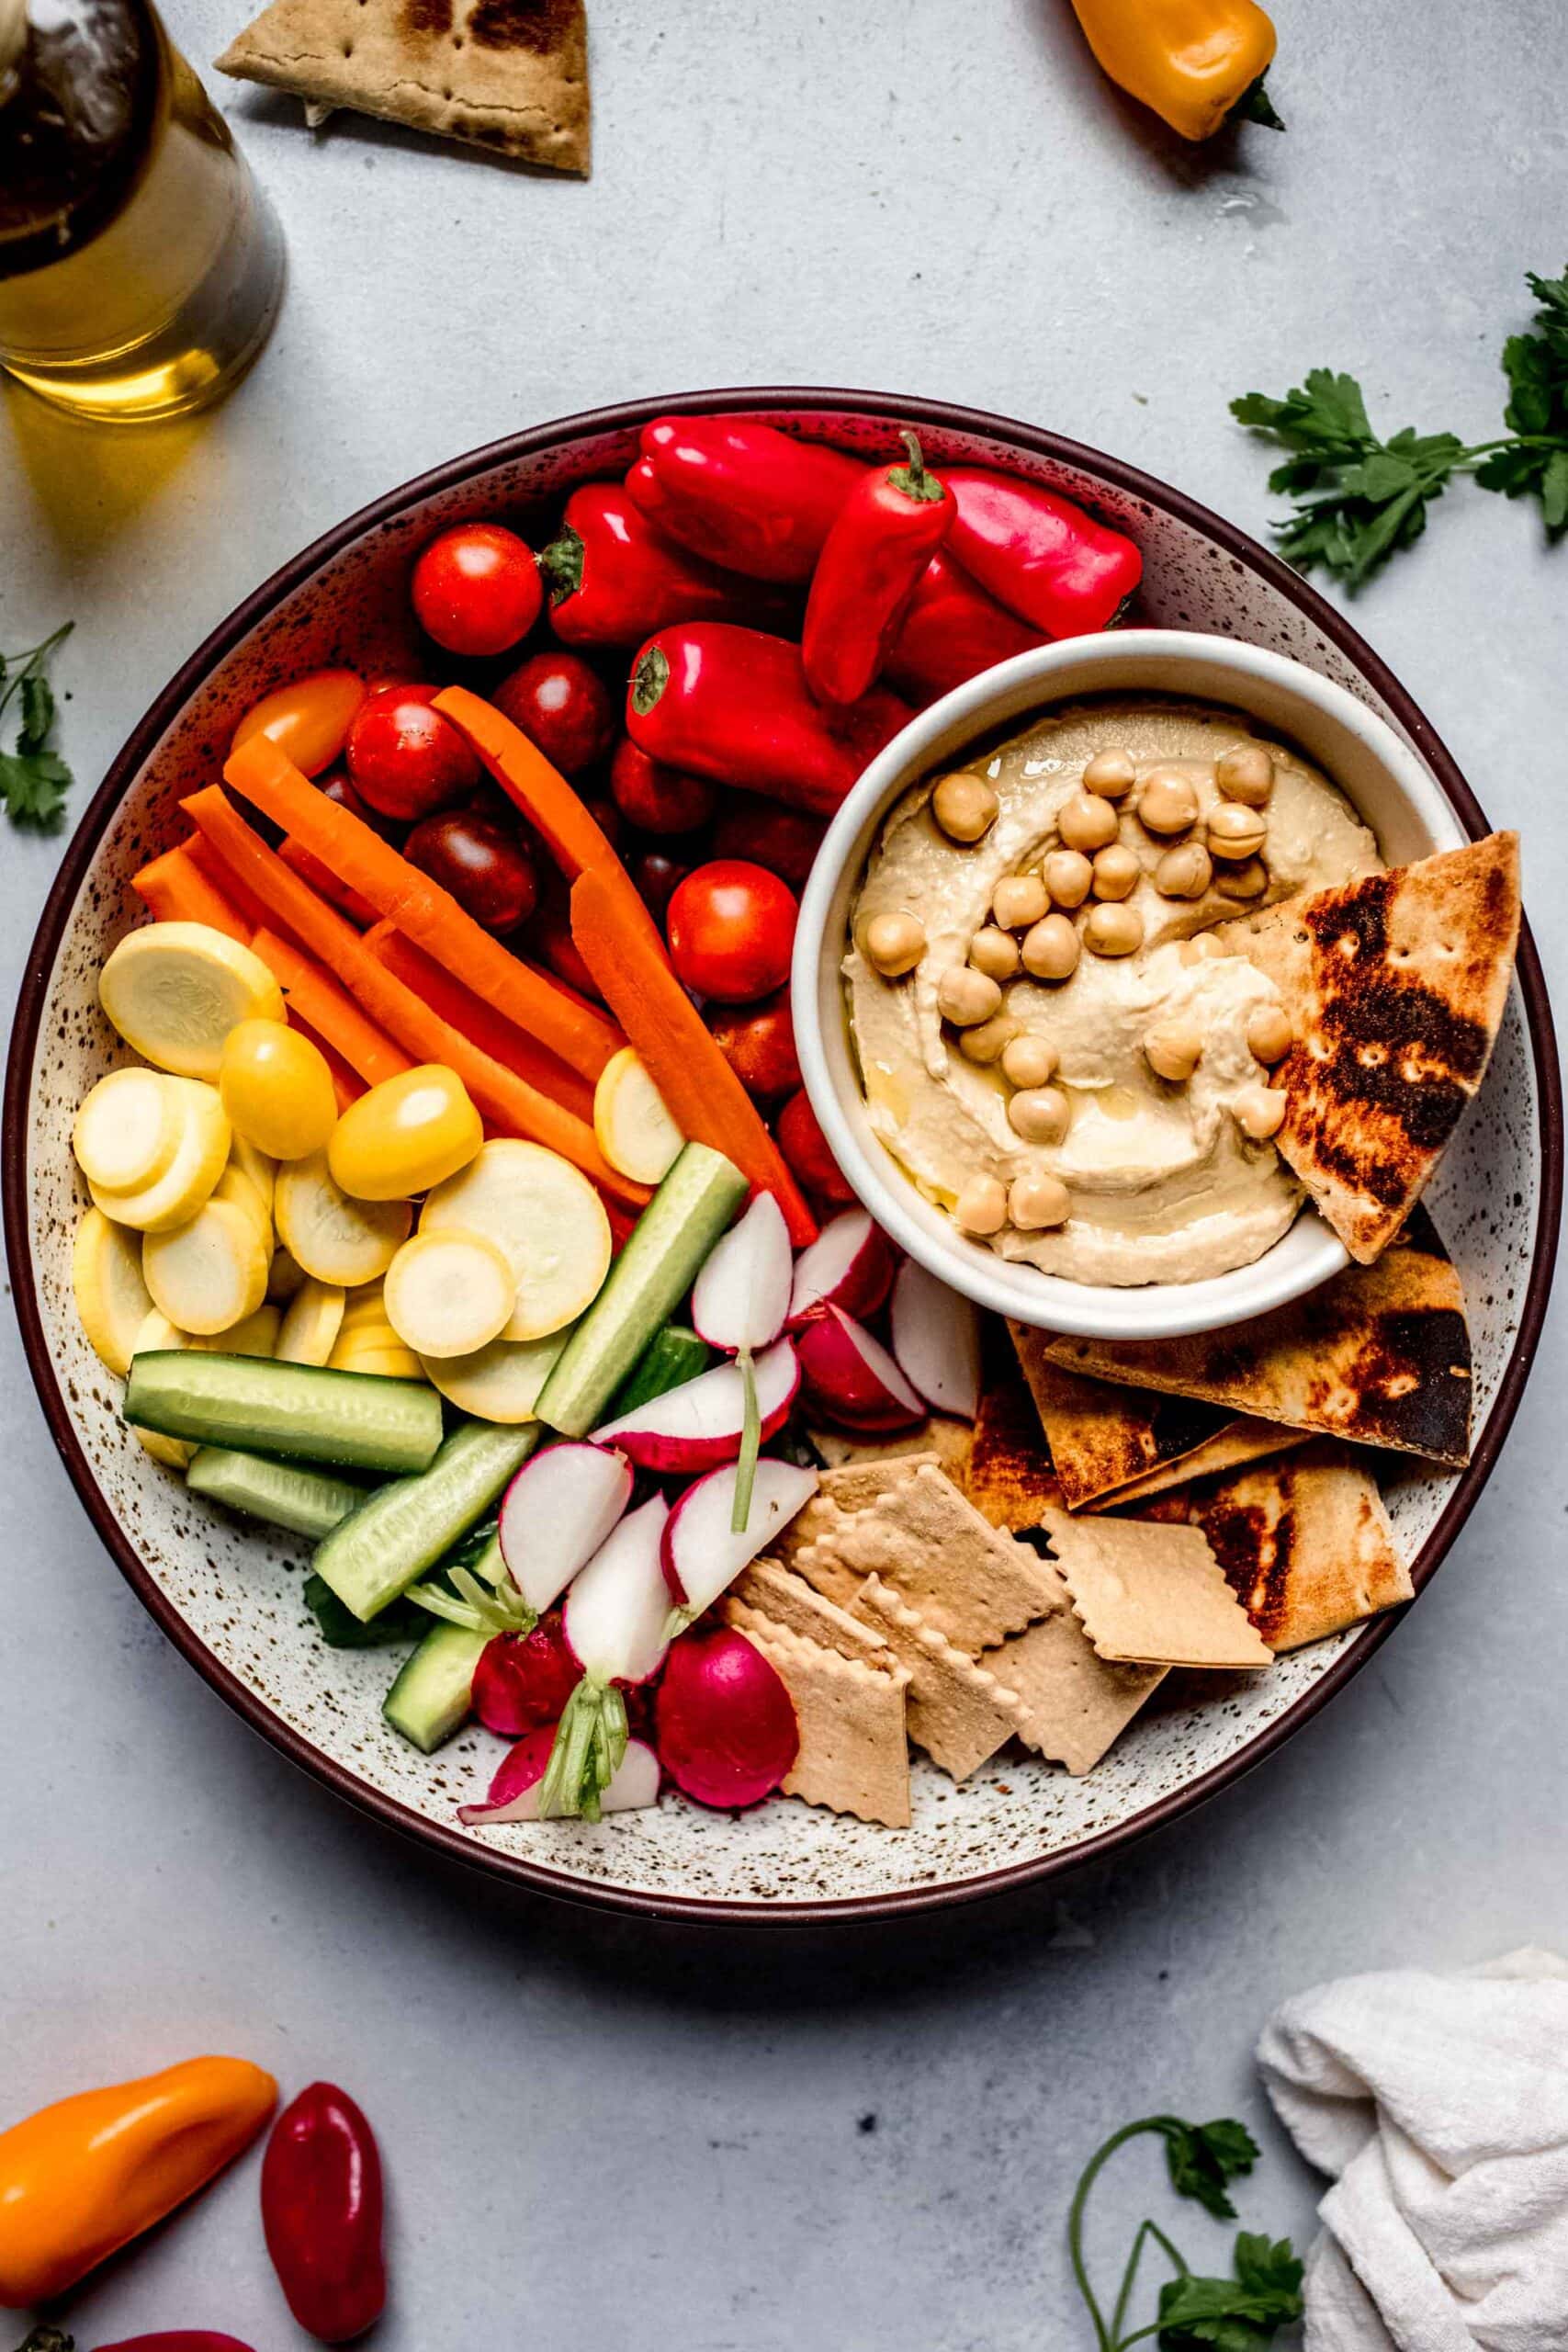 Hummus on platter with veggies and crackers.